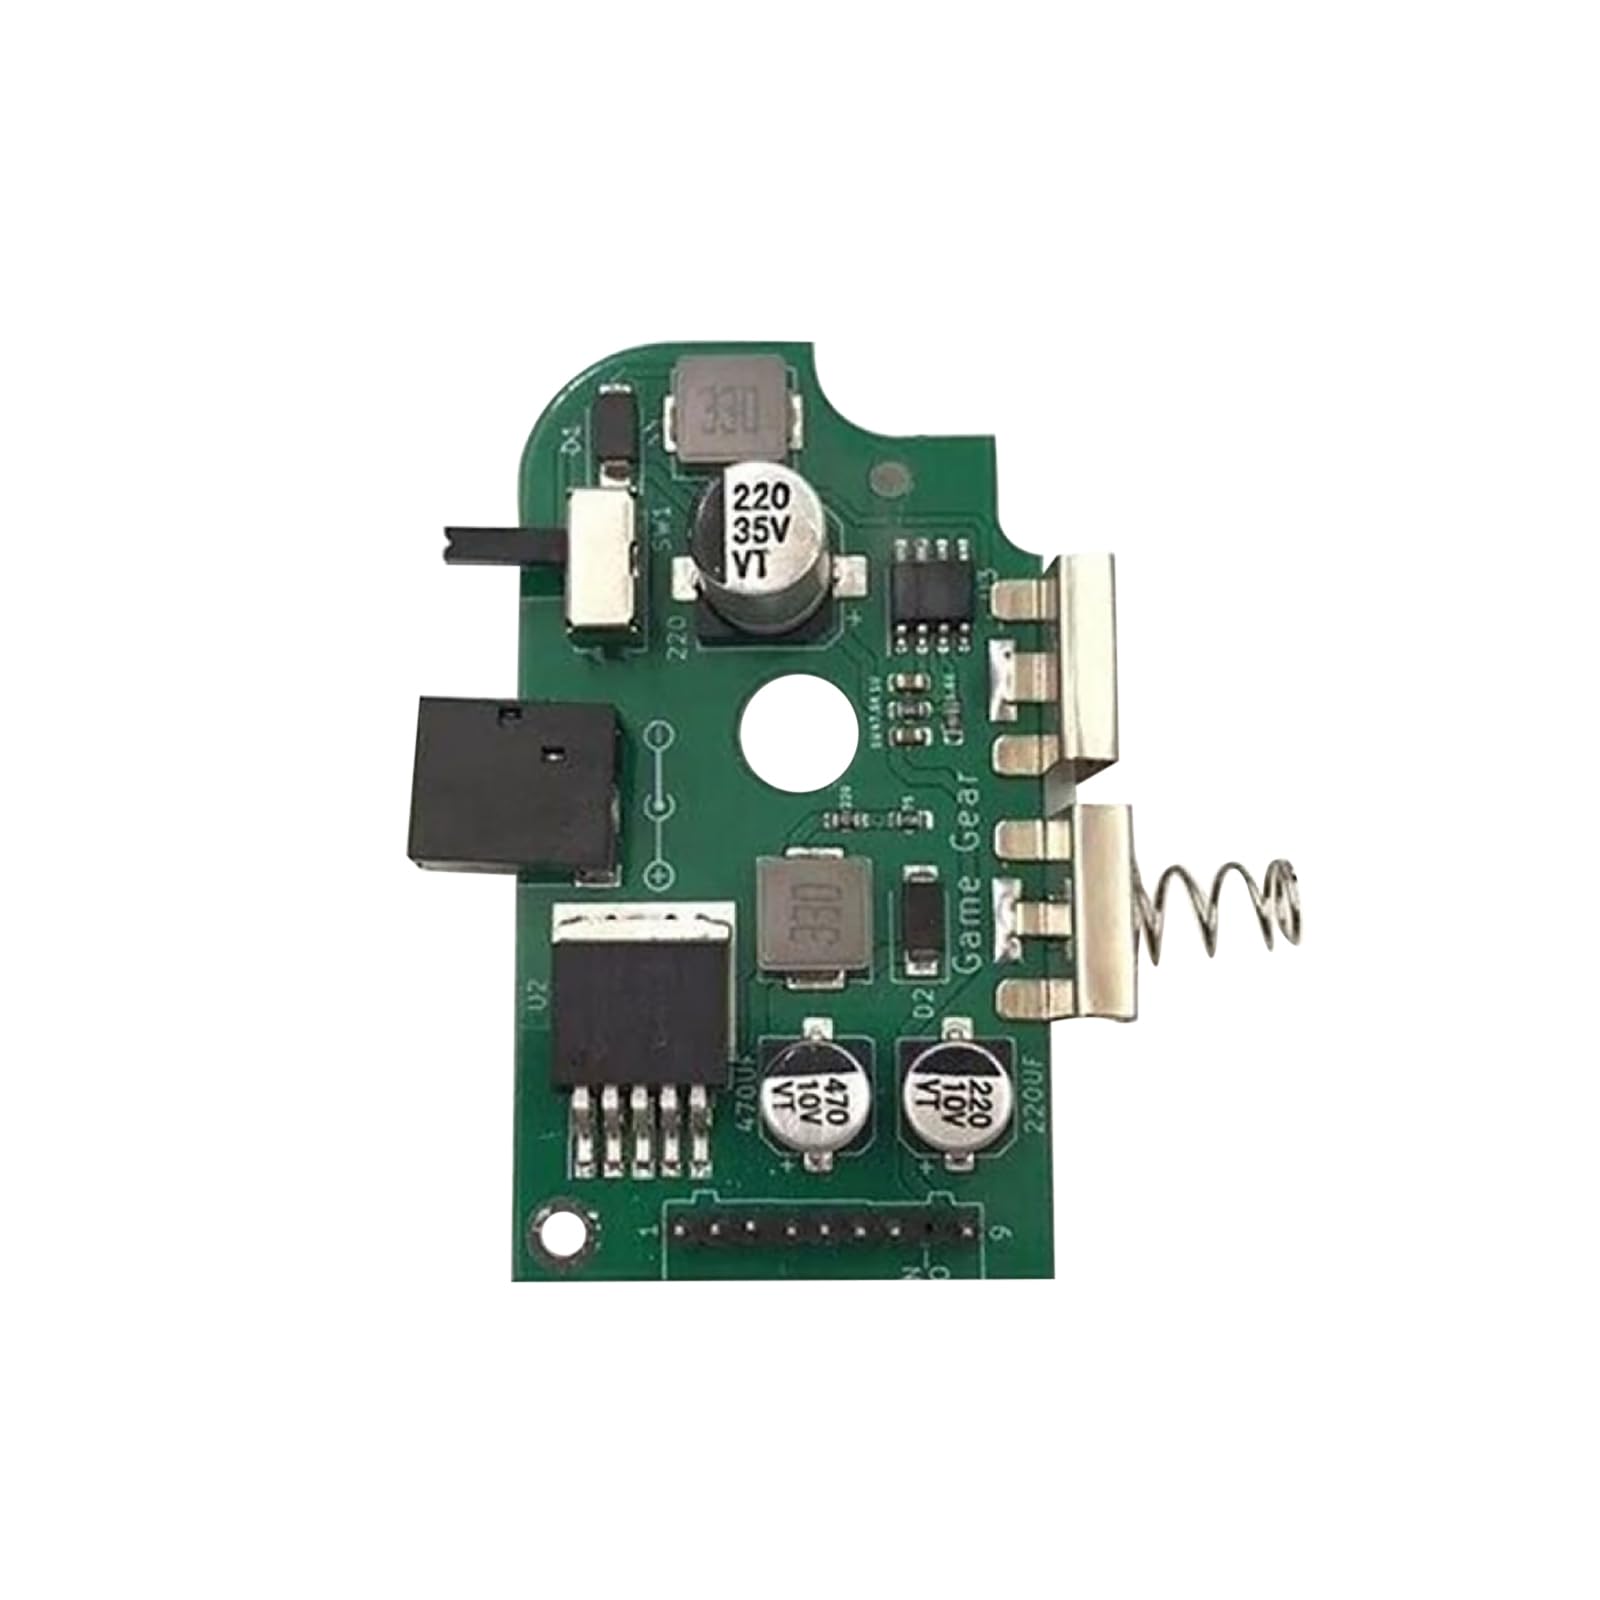 Video Game Console Main PCB Printed Circuit Board Replacement Power Switch Motherboard for Sega Game Gear